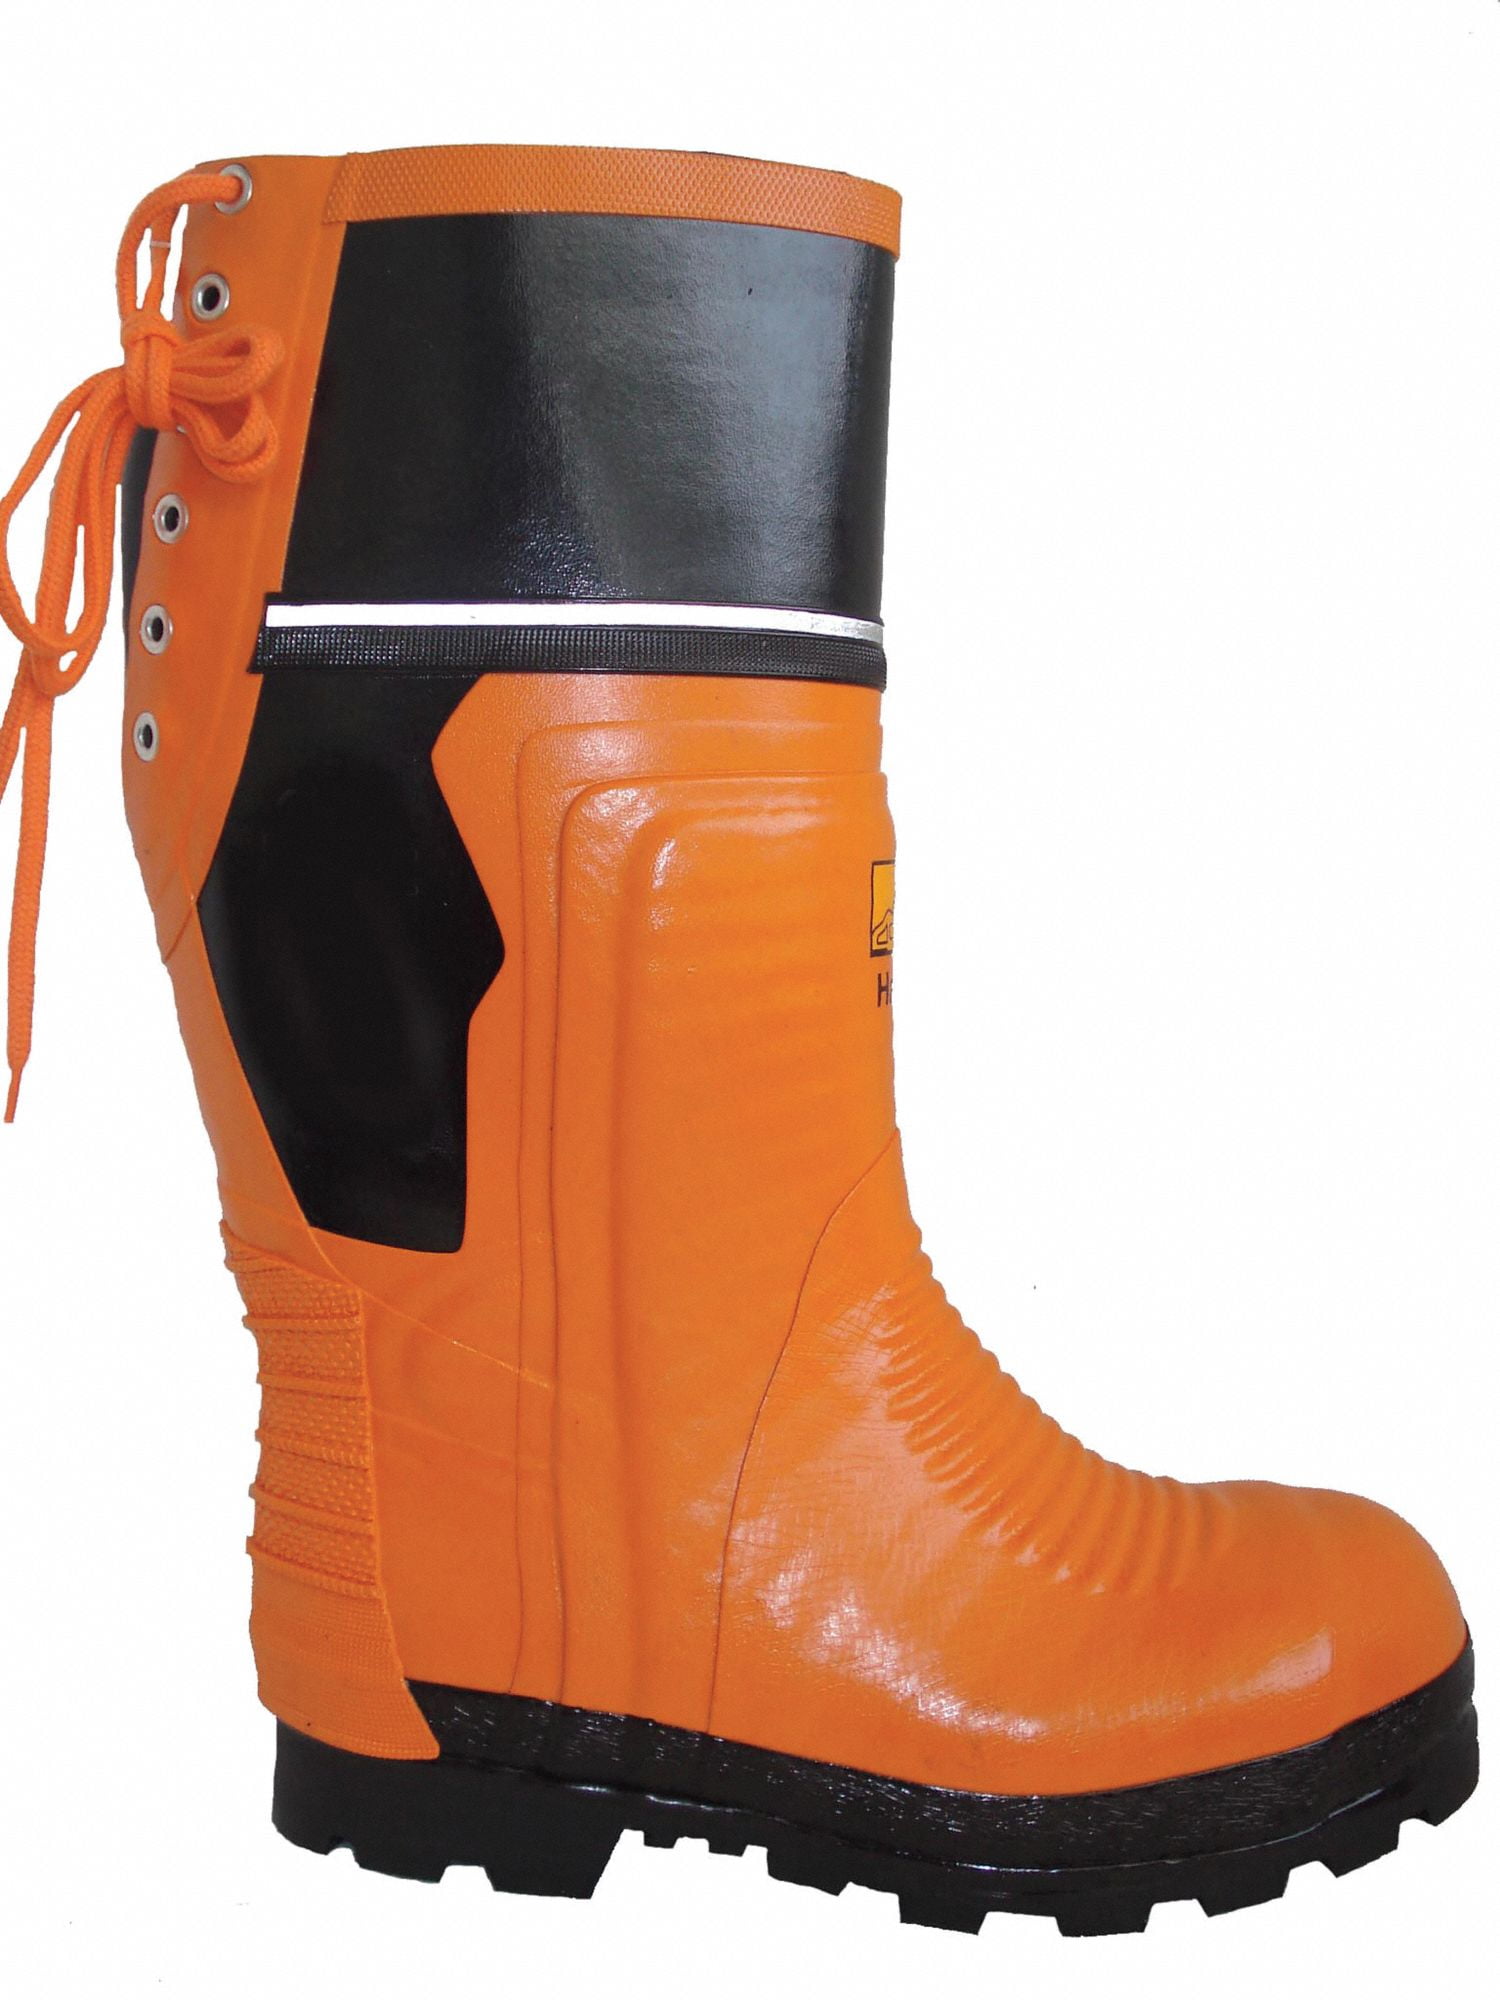 CLC Yellow & Black Size 10 Fabric Lined Over The Shoe Slush Rubber Boot R20010 